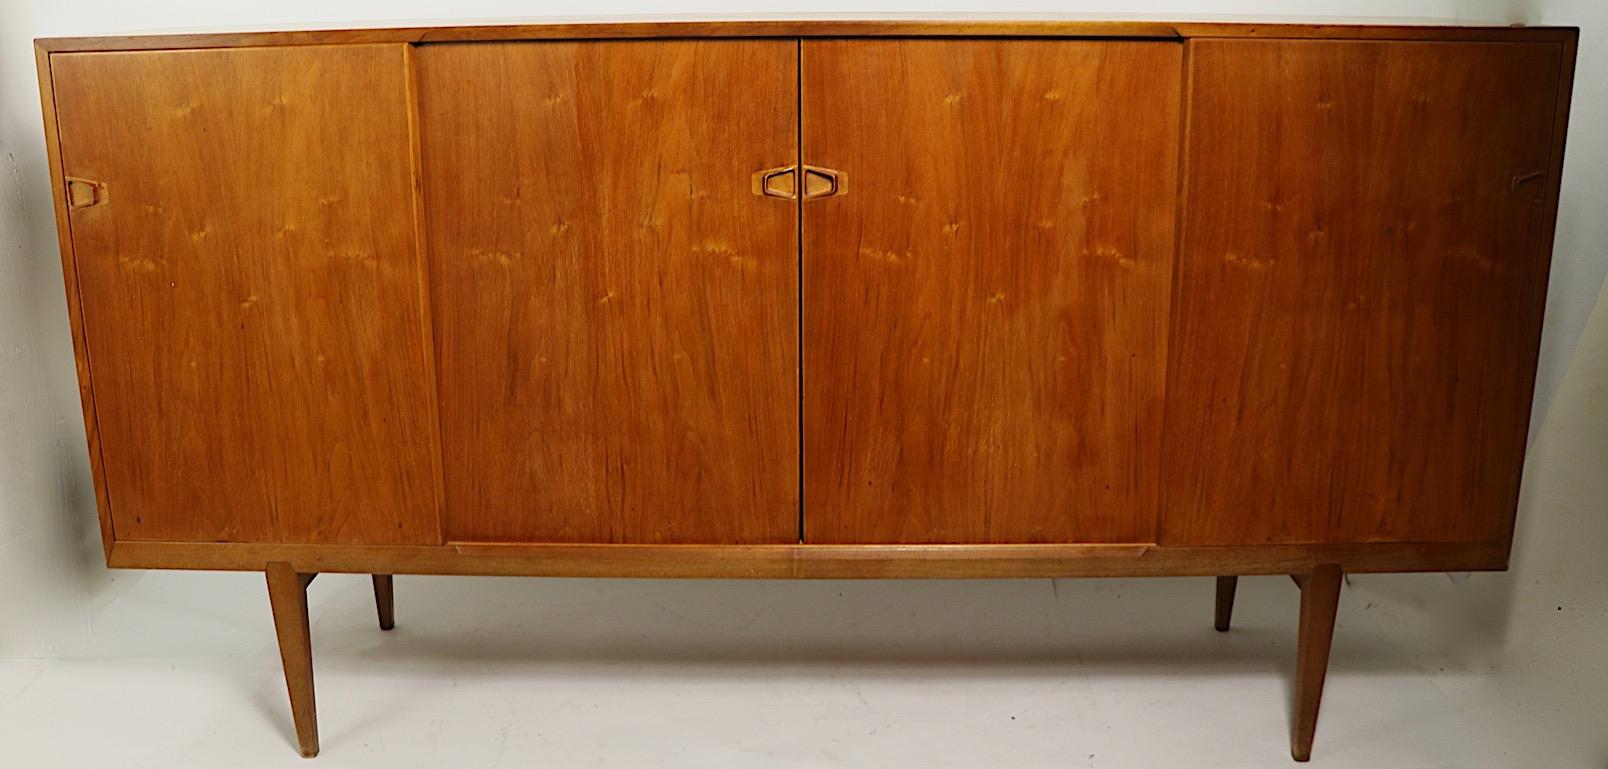 Classic Danish modern sideboard by Brande Mobelindustri for Rosengren Hansen. The credenza features four sliding doors, which open to reveal shelved storage, and interior drawers. This example is in good, original condition, showing only light